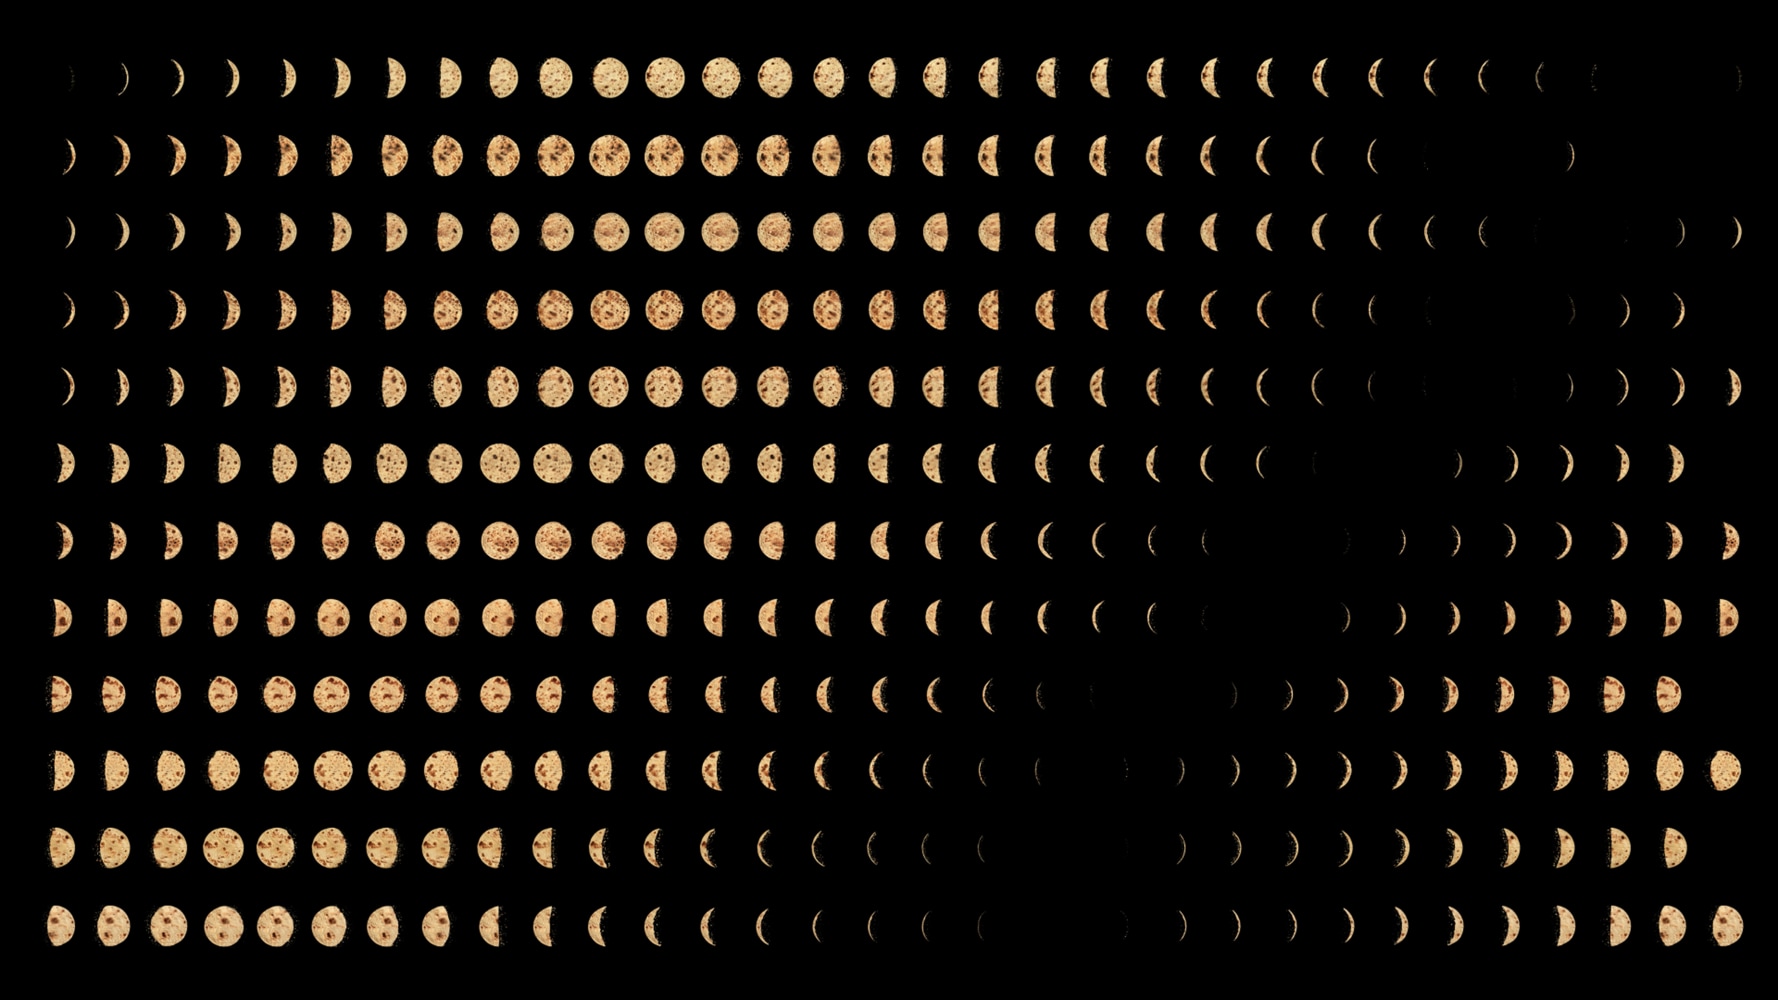 film still of rotis shaped like the phases of the moon against a black background